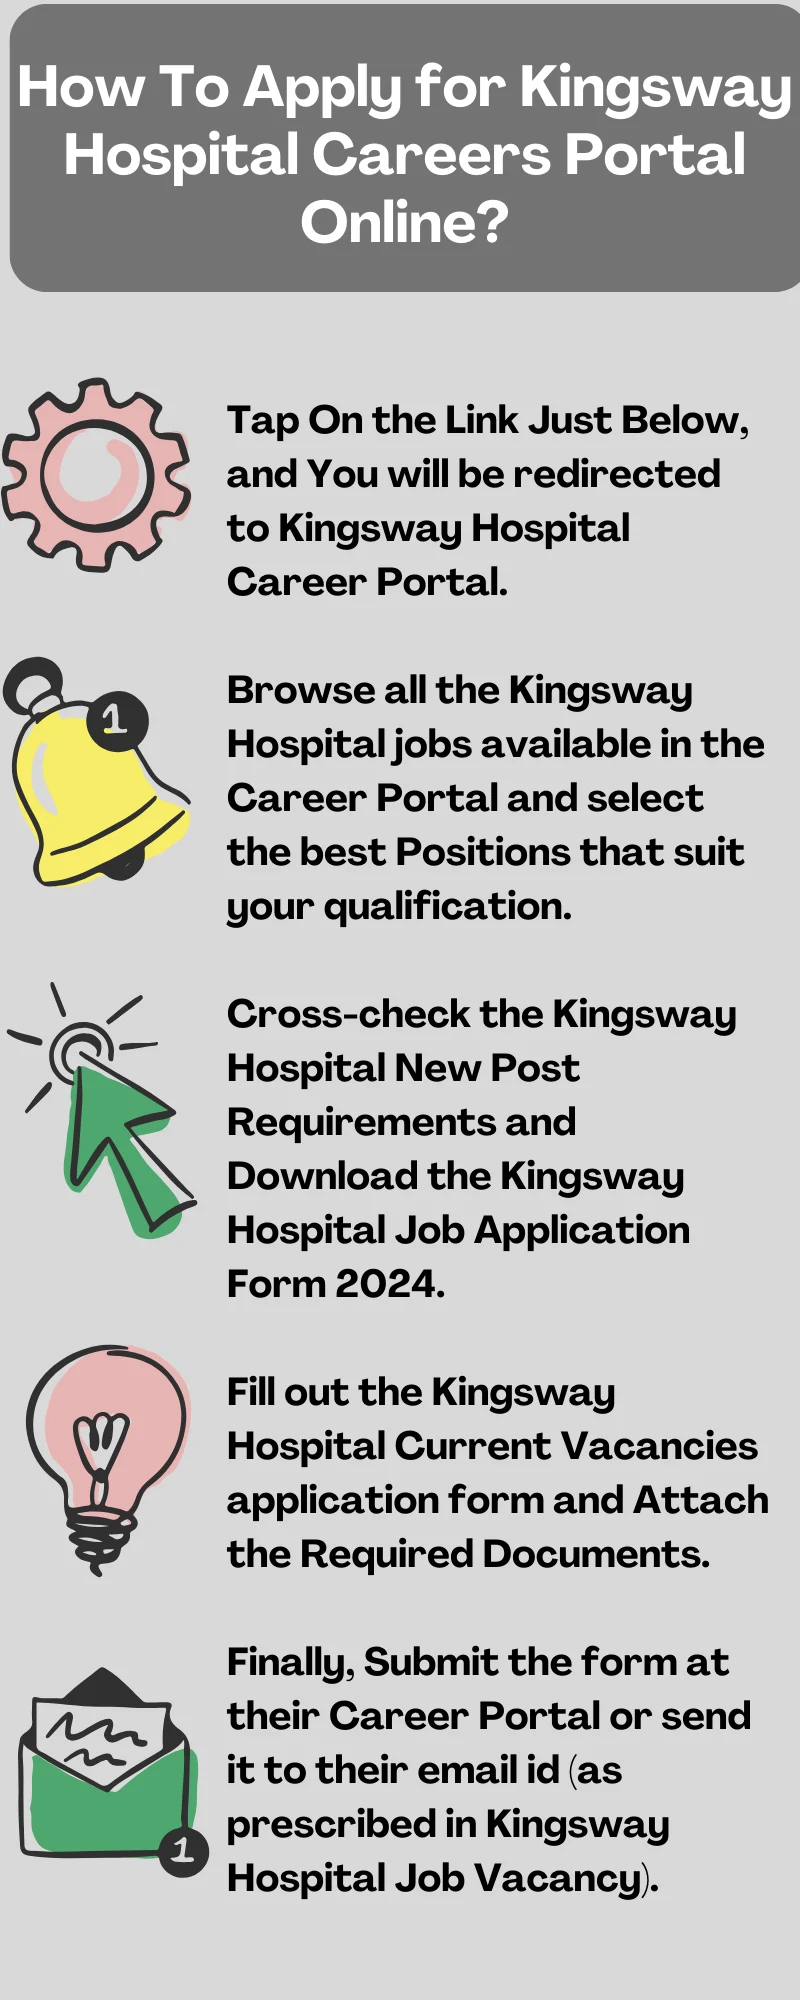 How To Apply for Kingsway Hospital Careers Portal Online?